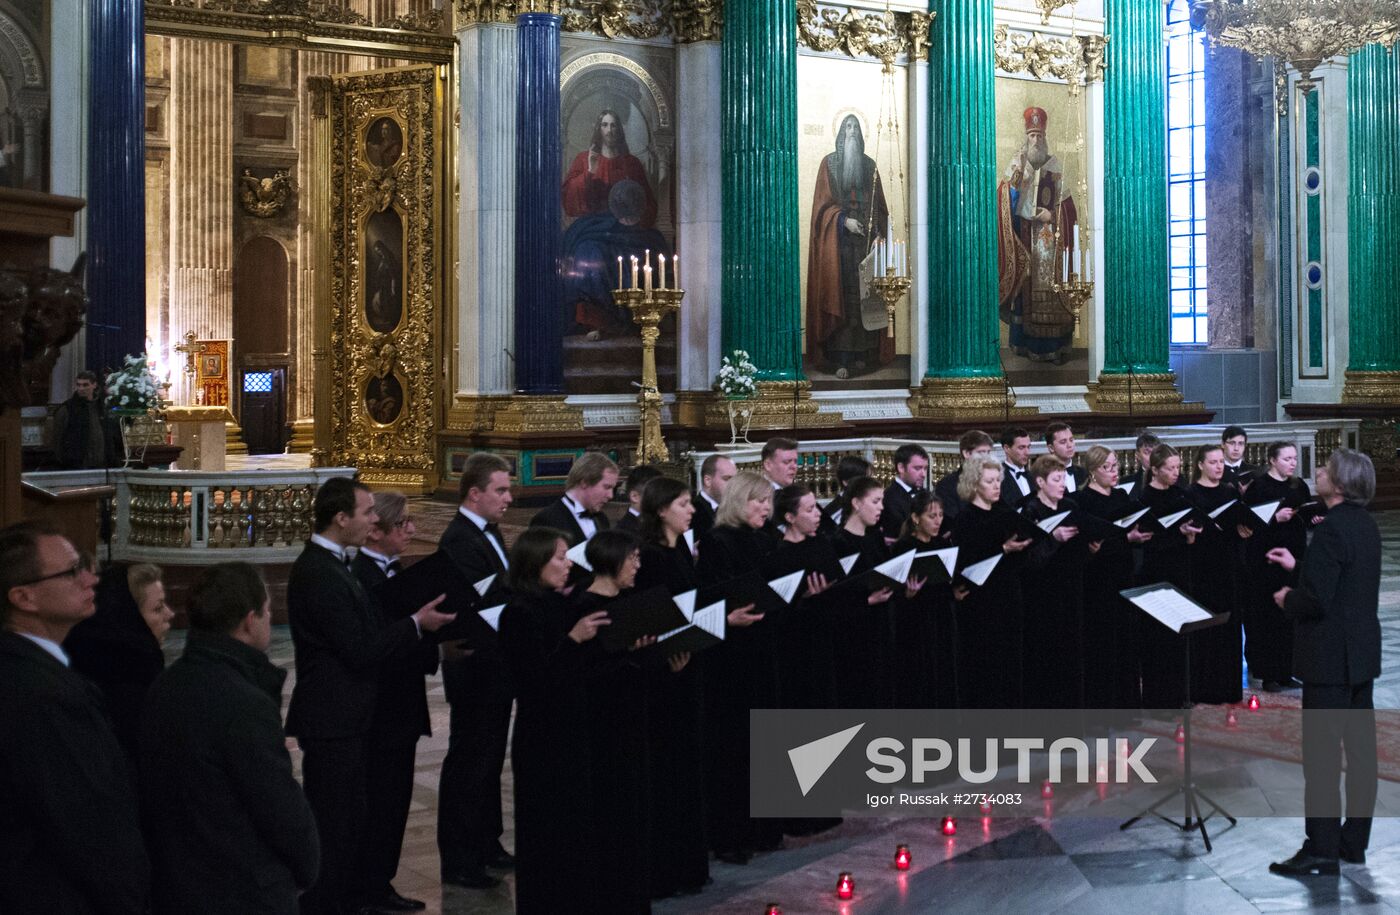 Memorial service for victims of A321 air crash, in St. Petersburg